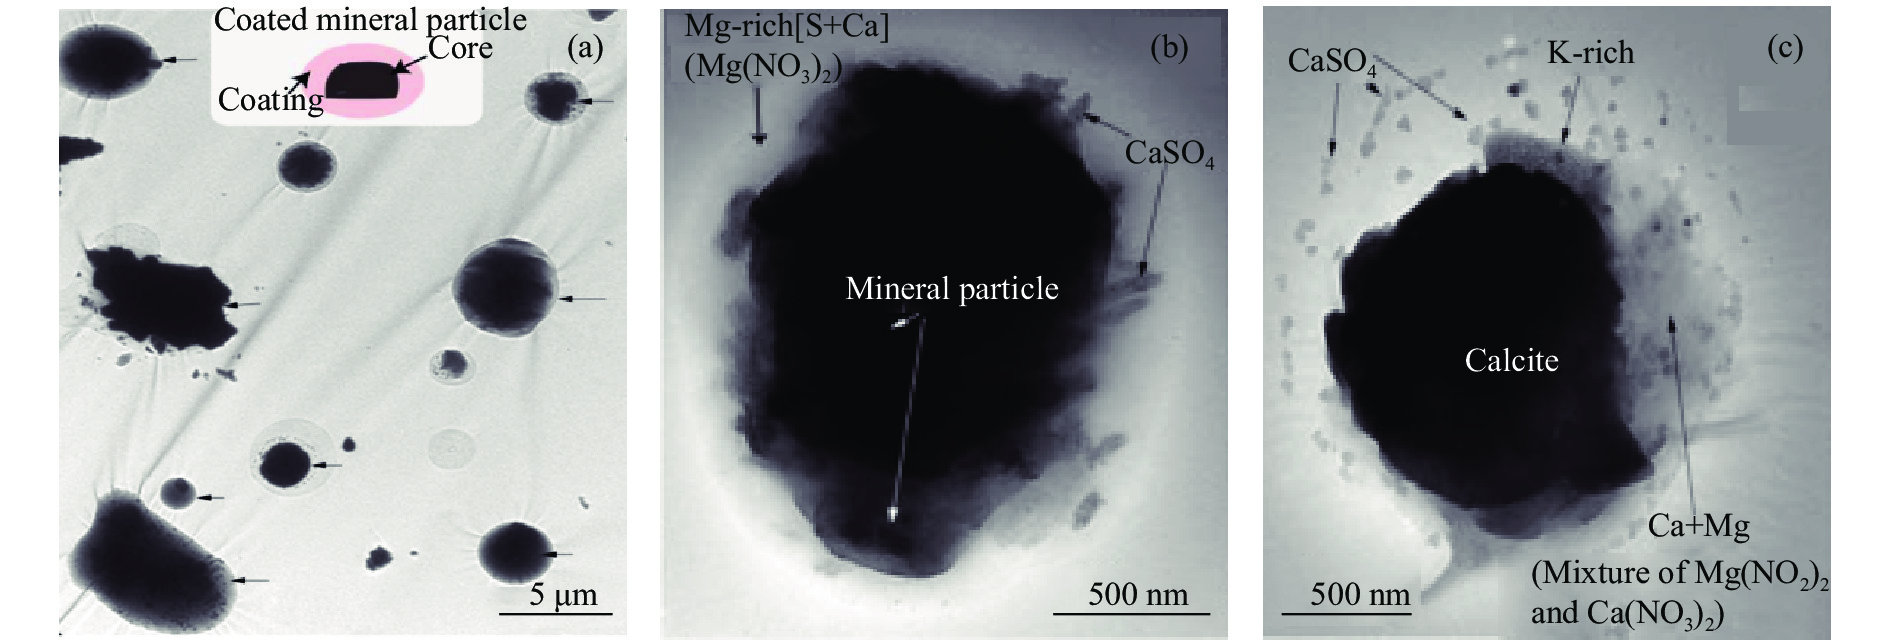 TEM images of the coated mineral dust particles[15]